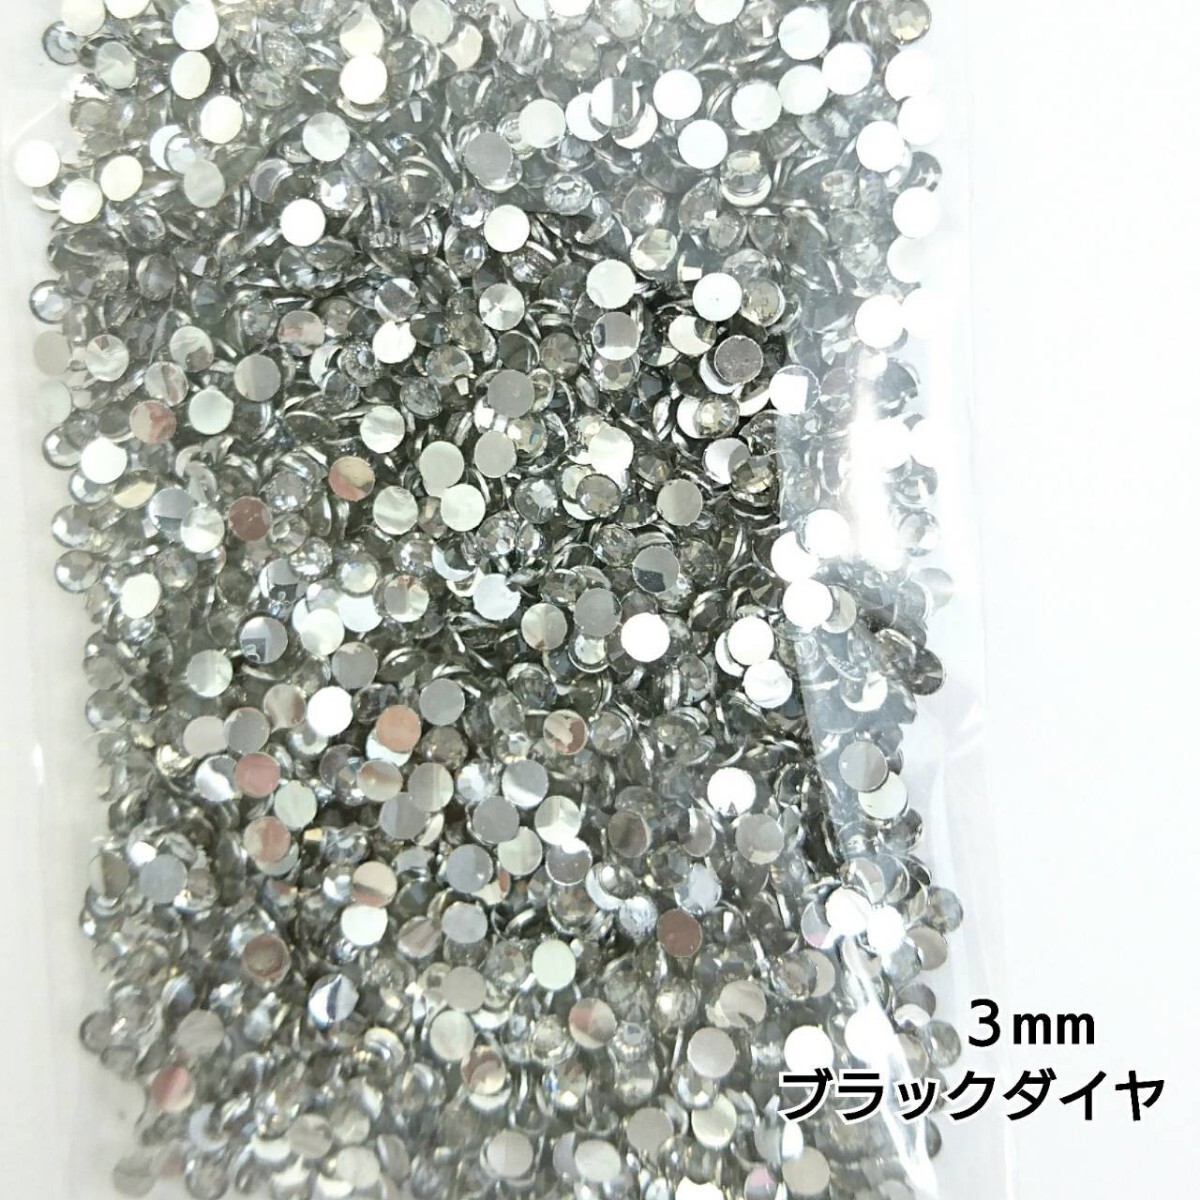  macromolecule Stone 3mm( black diamond ) approximately 2000 bead | deco parts nails * anonymity delivery 